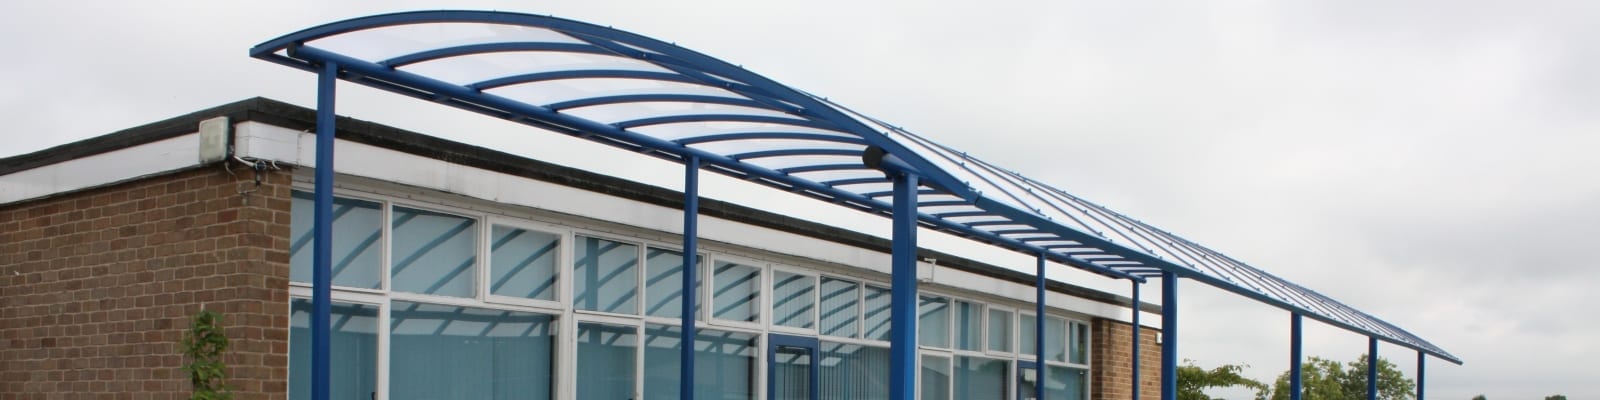 Old Dalby Primary School Curved Roof Shelter